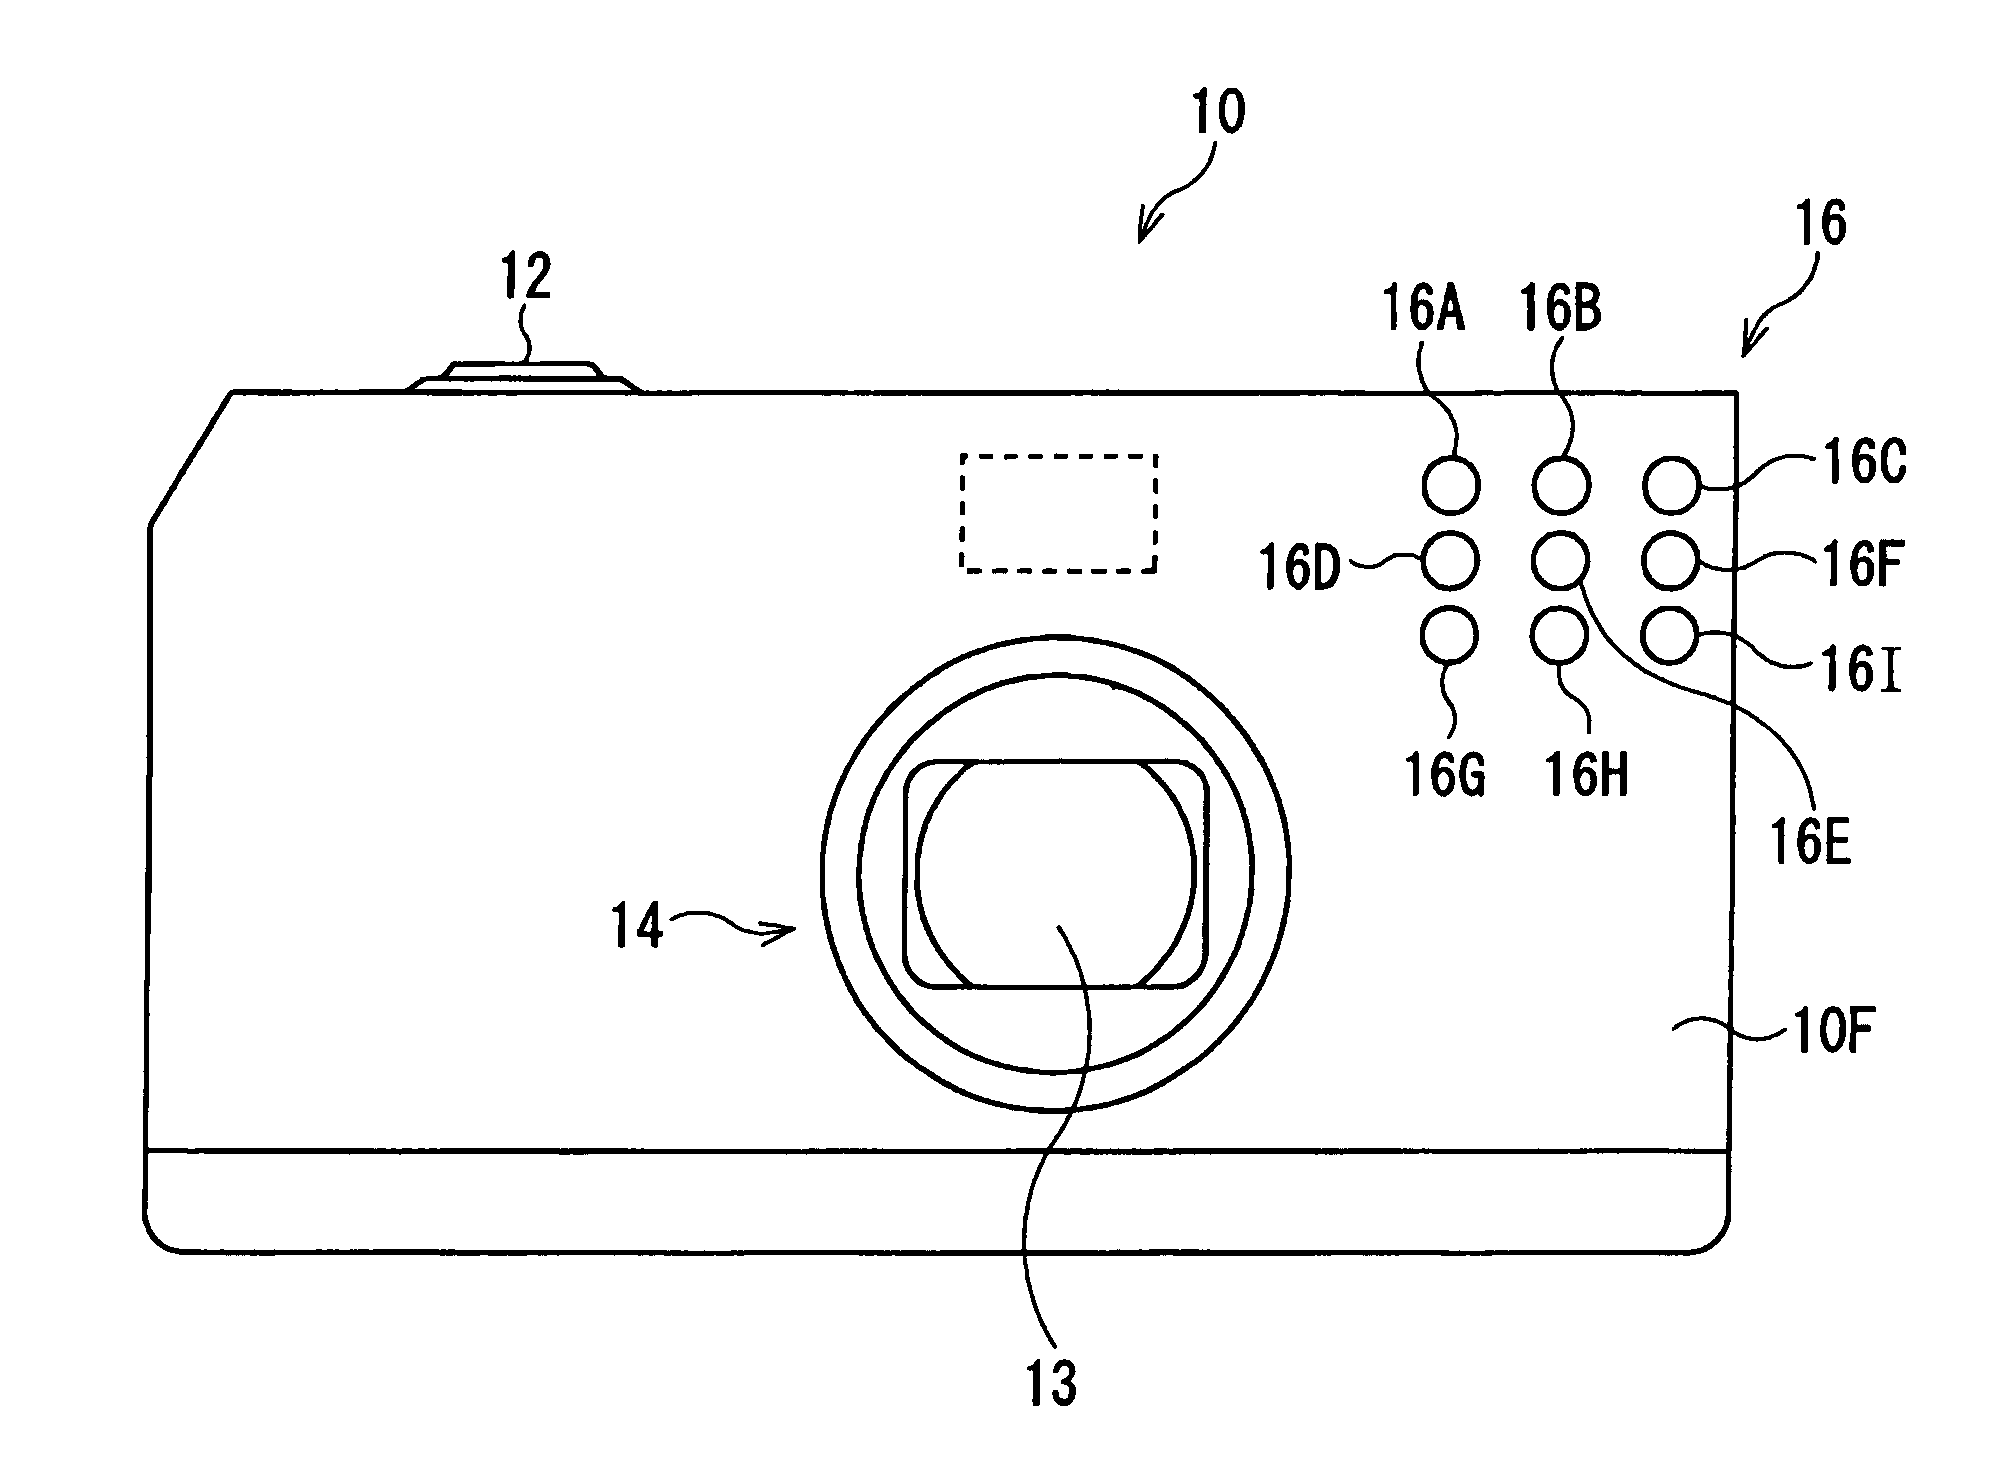 Light-amount control device for photographing